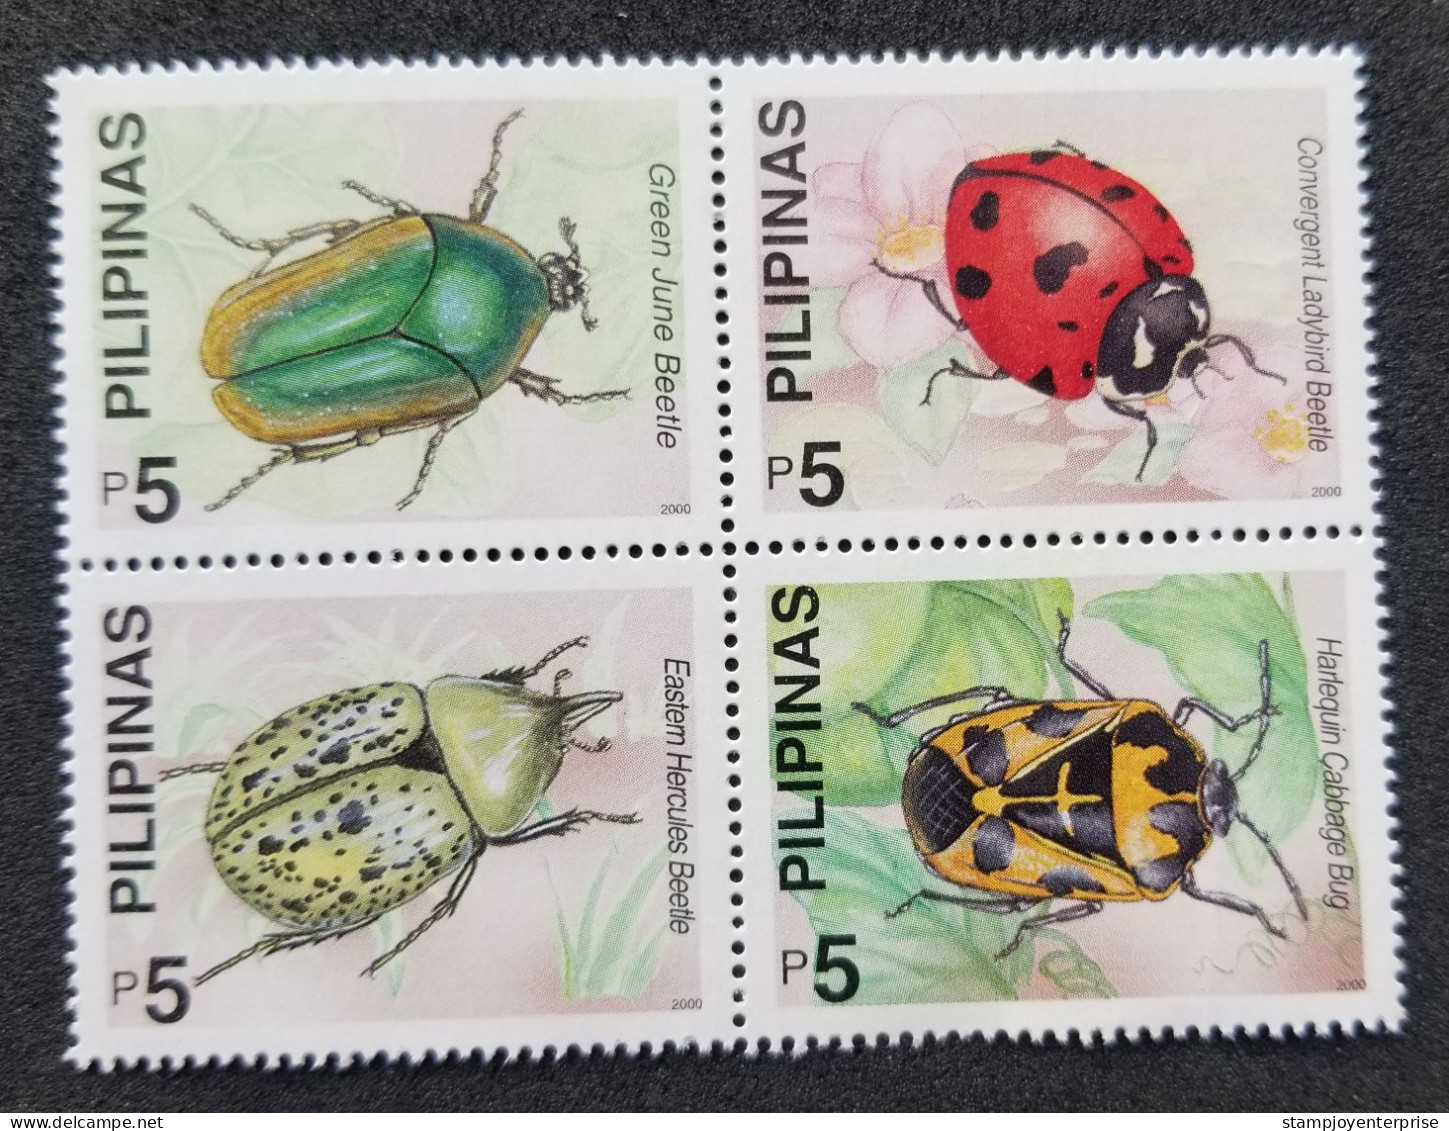 Philippines Insects 2000 Beetles Bug Ladybird Insect Beetle (stamp) MNH - Filippijnen